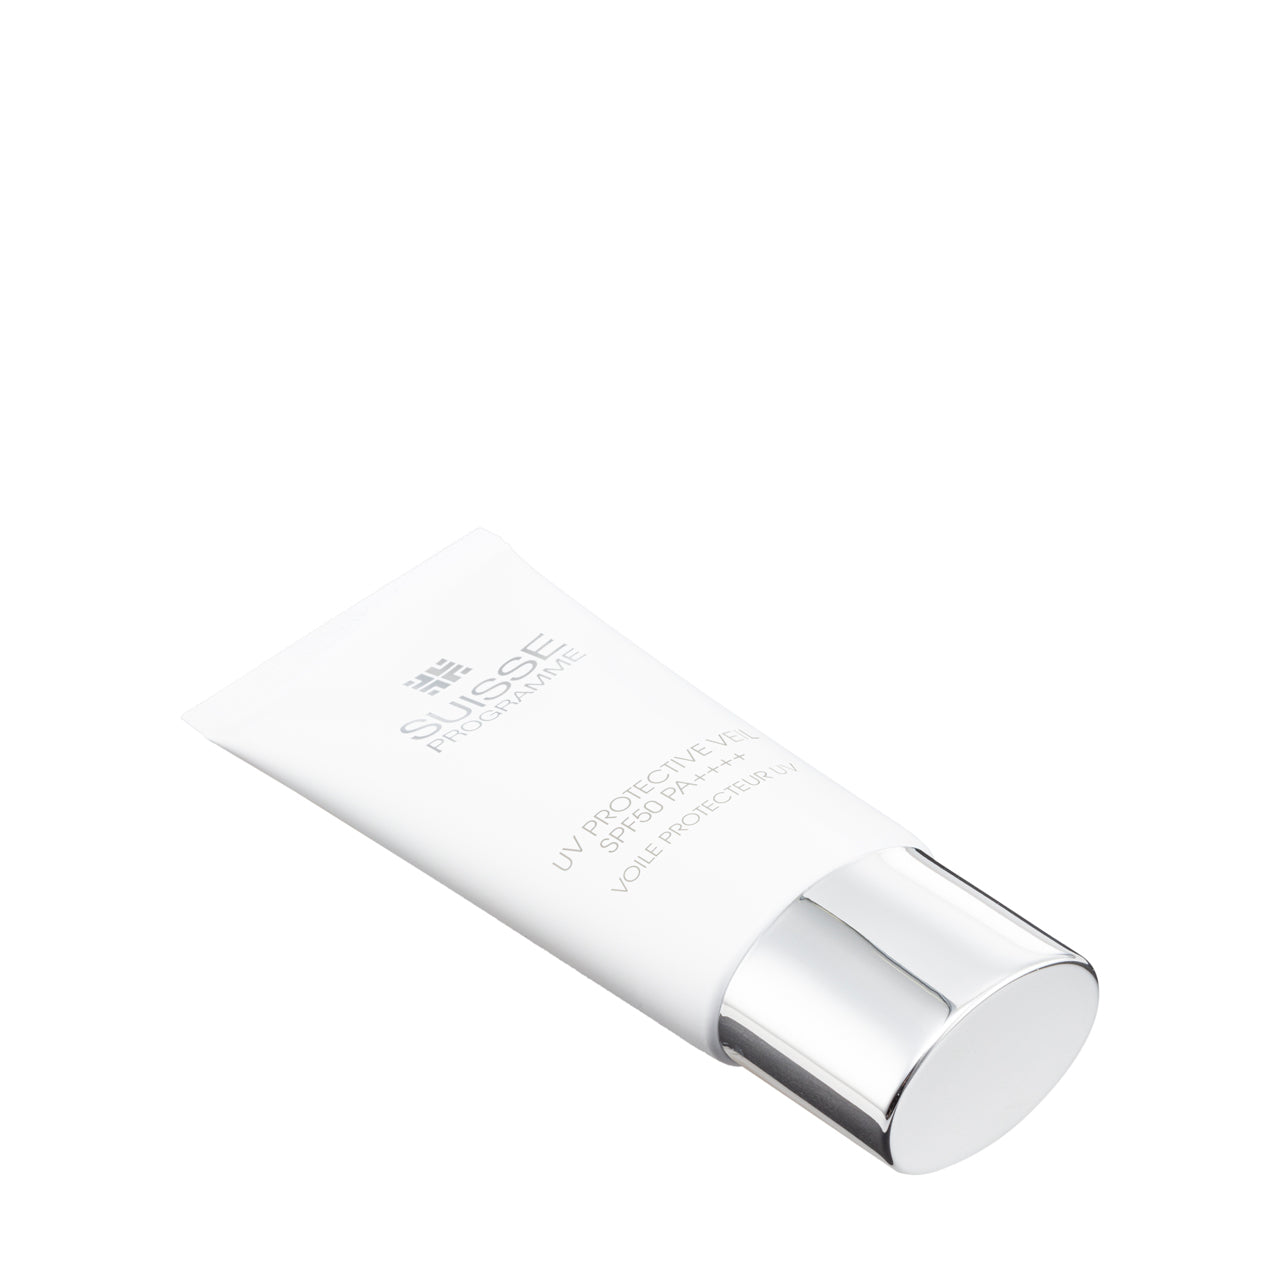 Suisse Programme Uv Protective Veil SPF50 Pa++++ 50ML